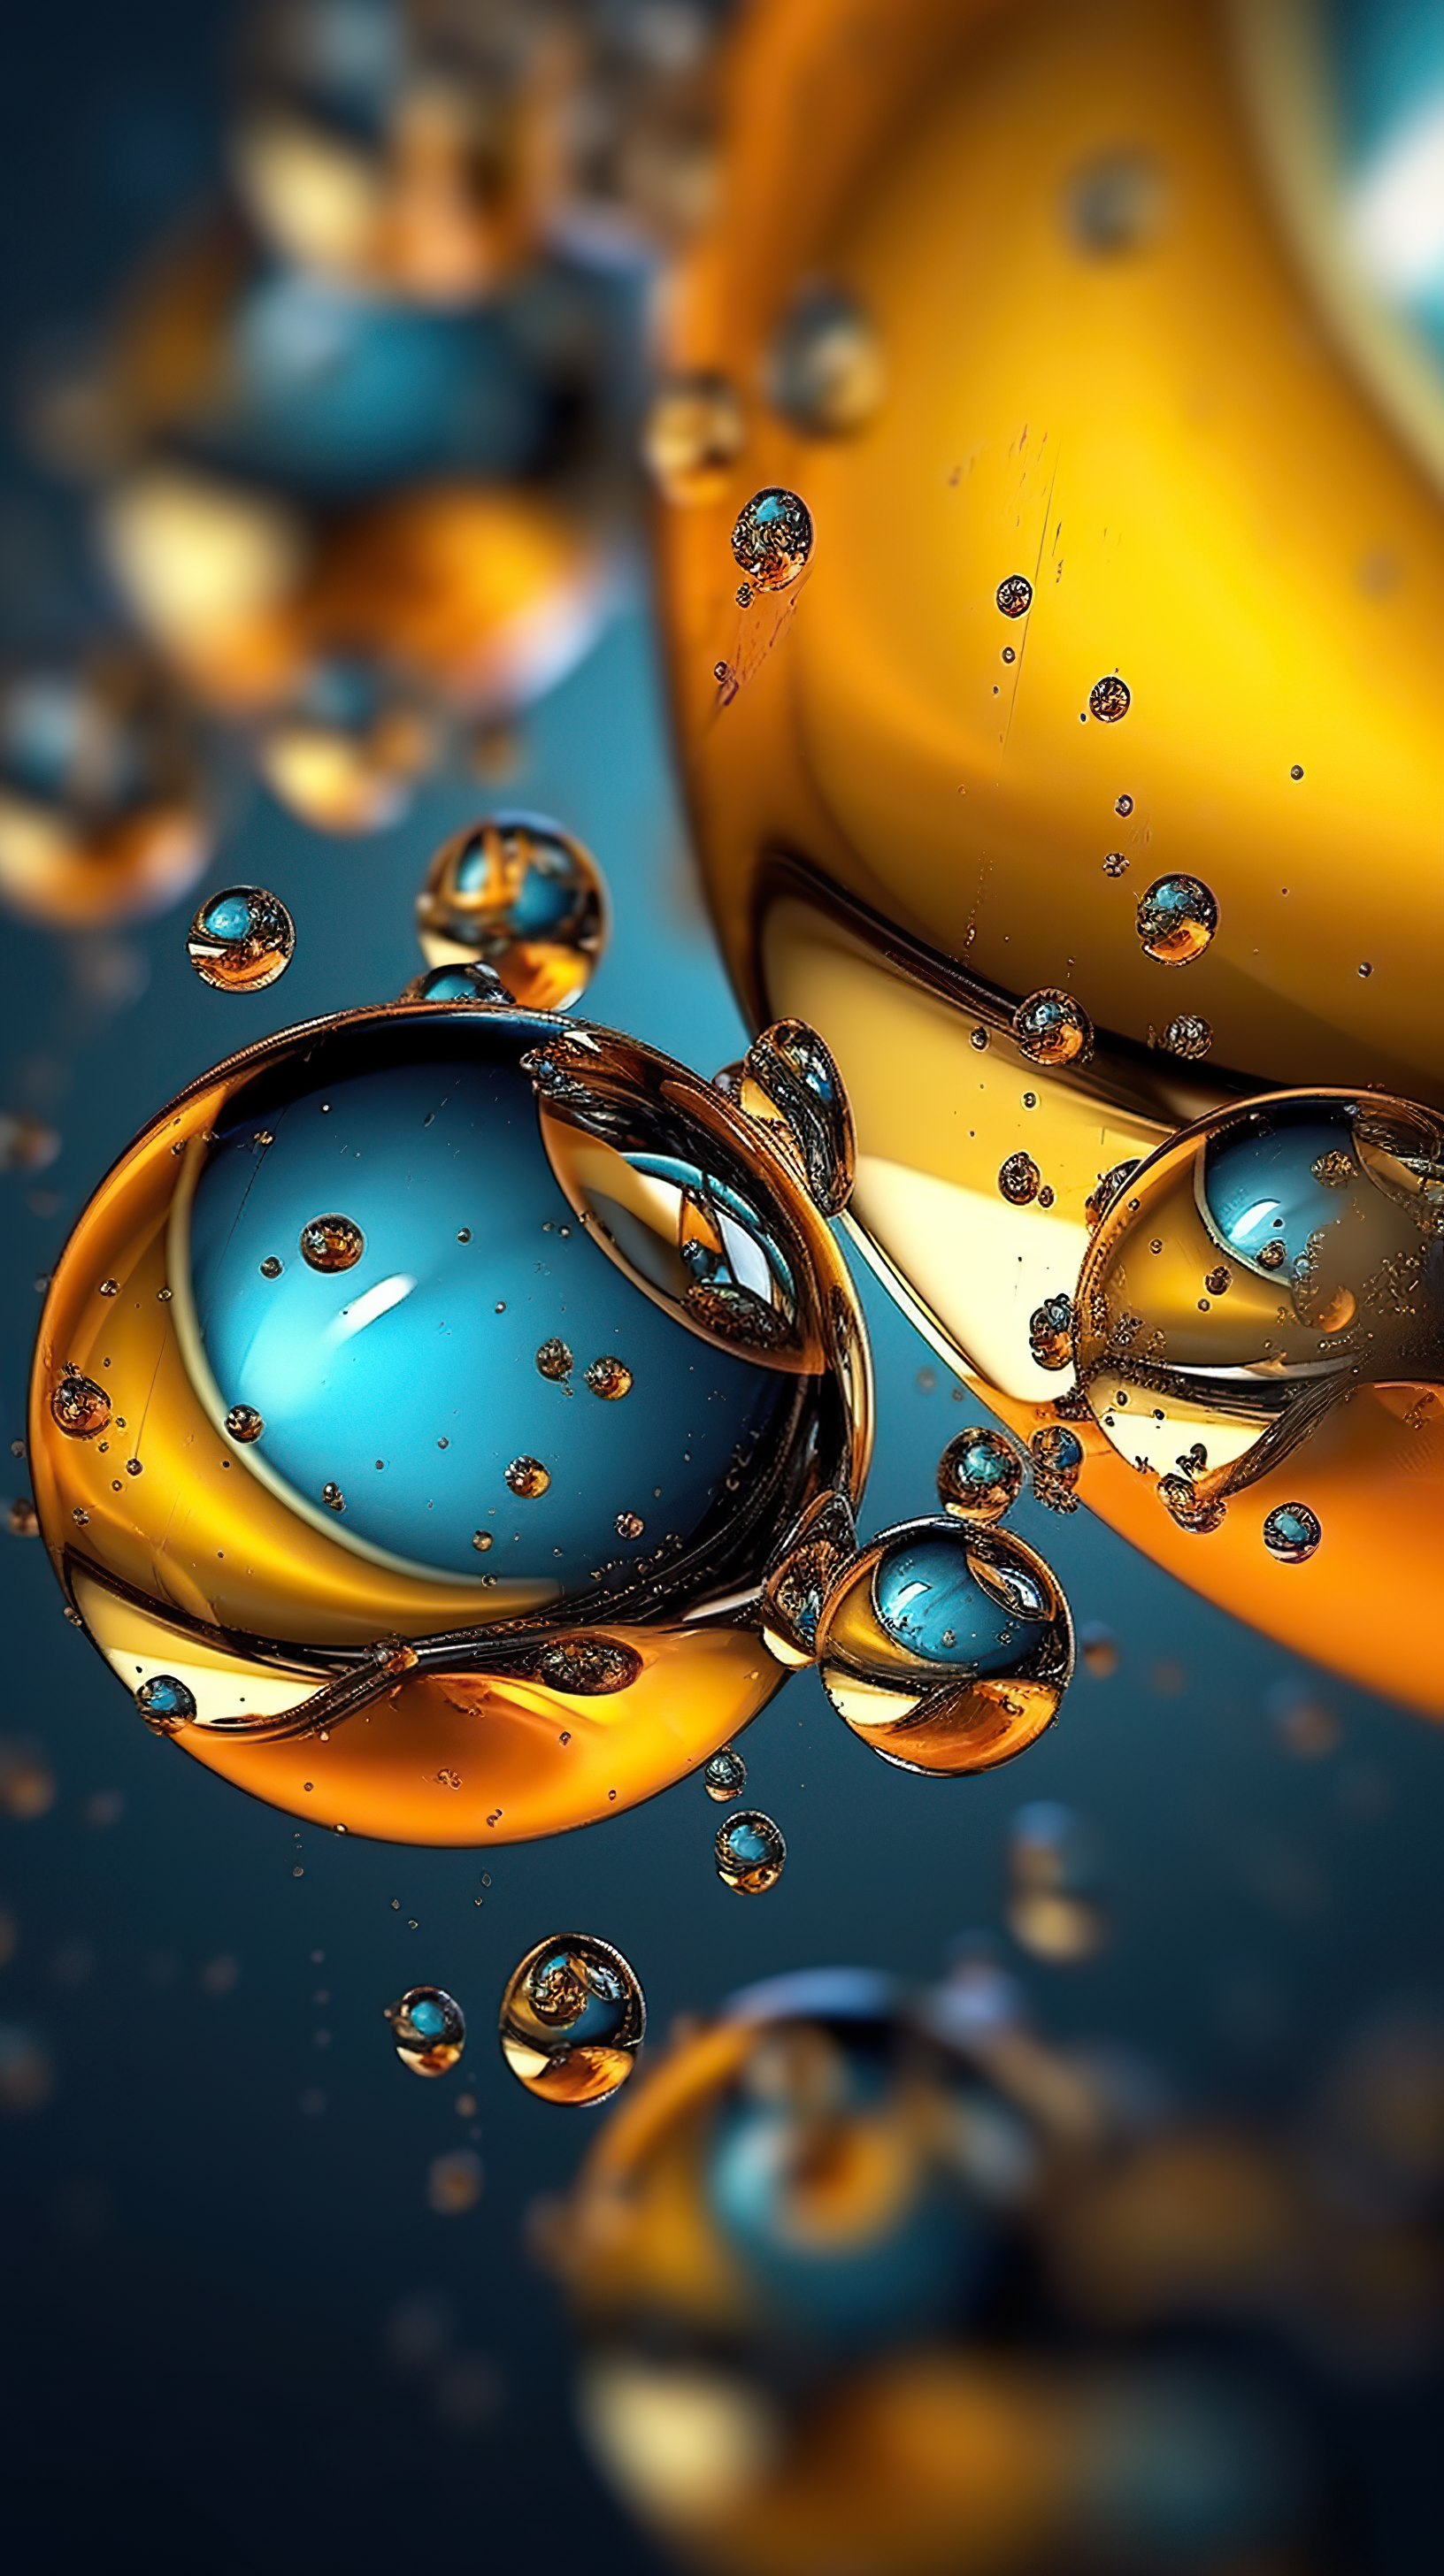 Background with drops in oil with blue and orange color